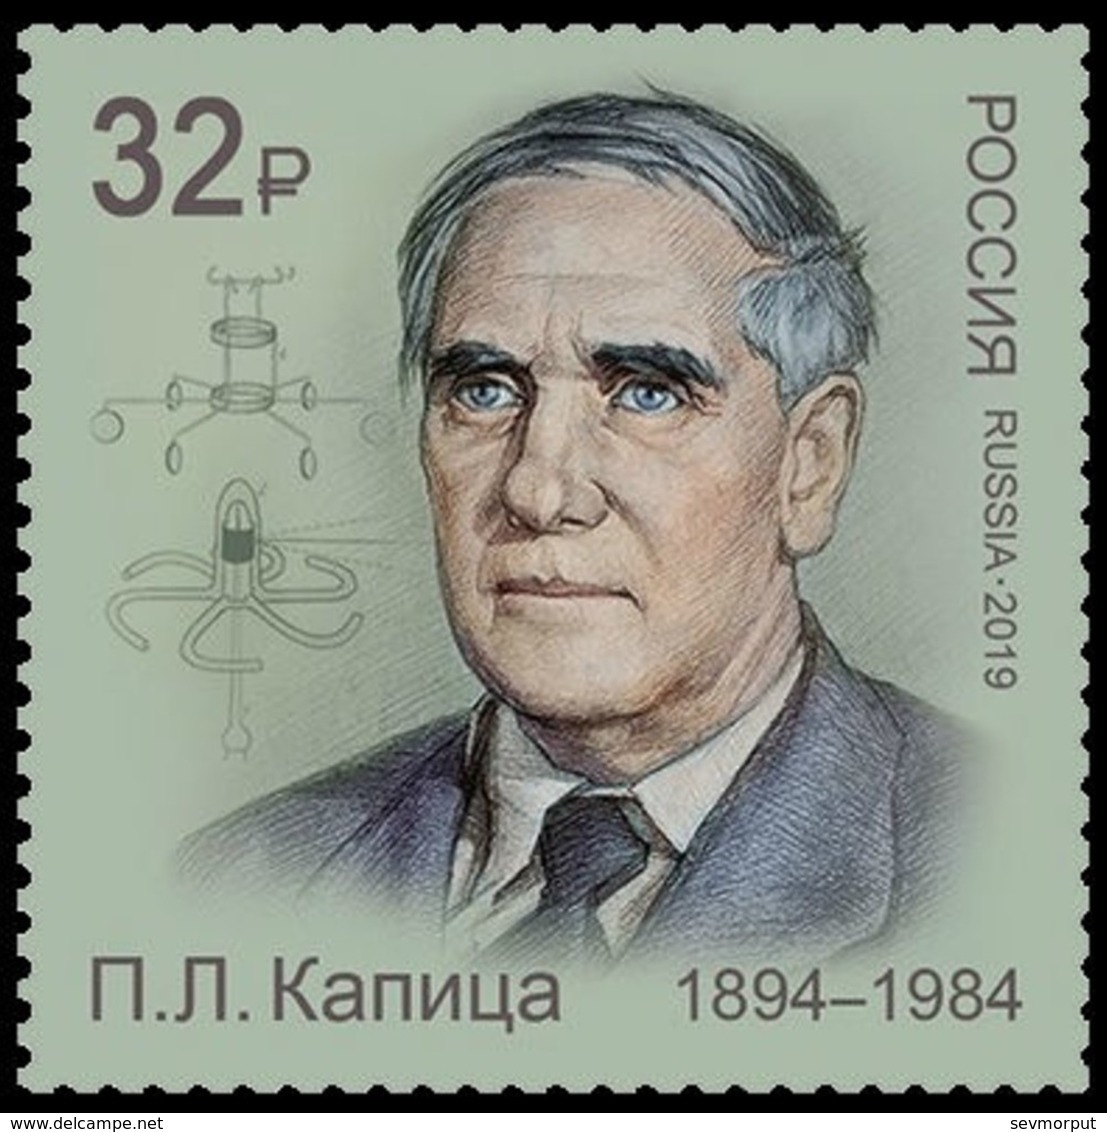 RUSSIA 2019 Stamp MNH VF ** Mi 2698 KAPITSA PHYSICS PHYSIQUE SCIENCE NOBEL PRIZE SCIENTIST 2479 - Physique